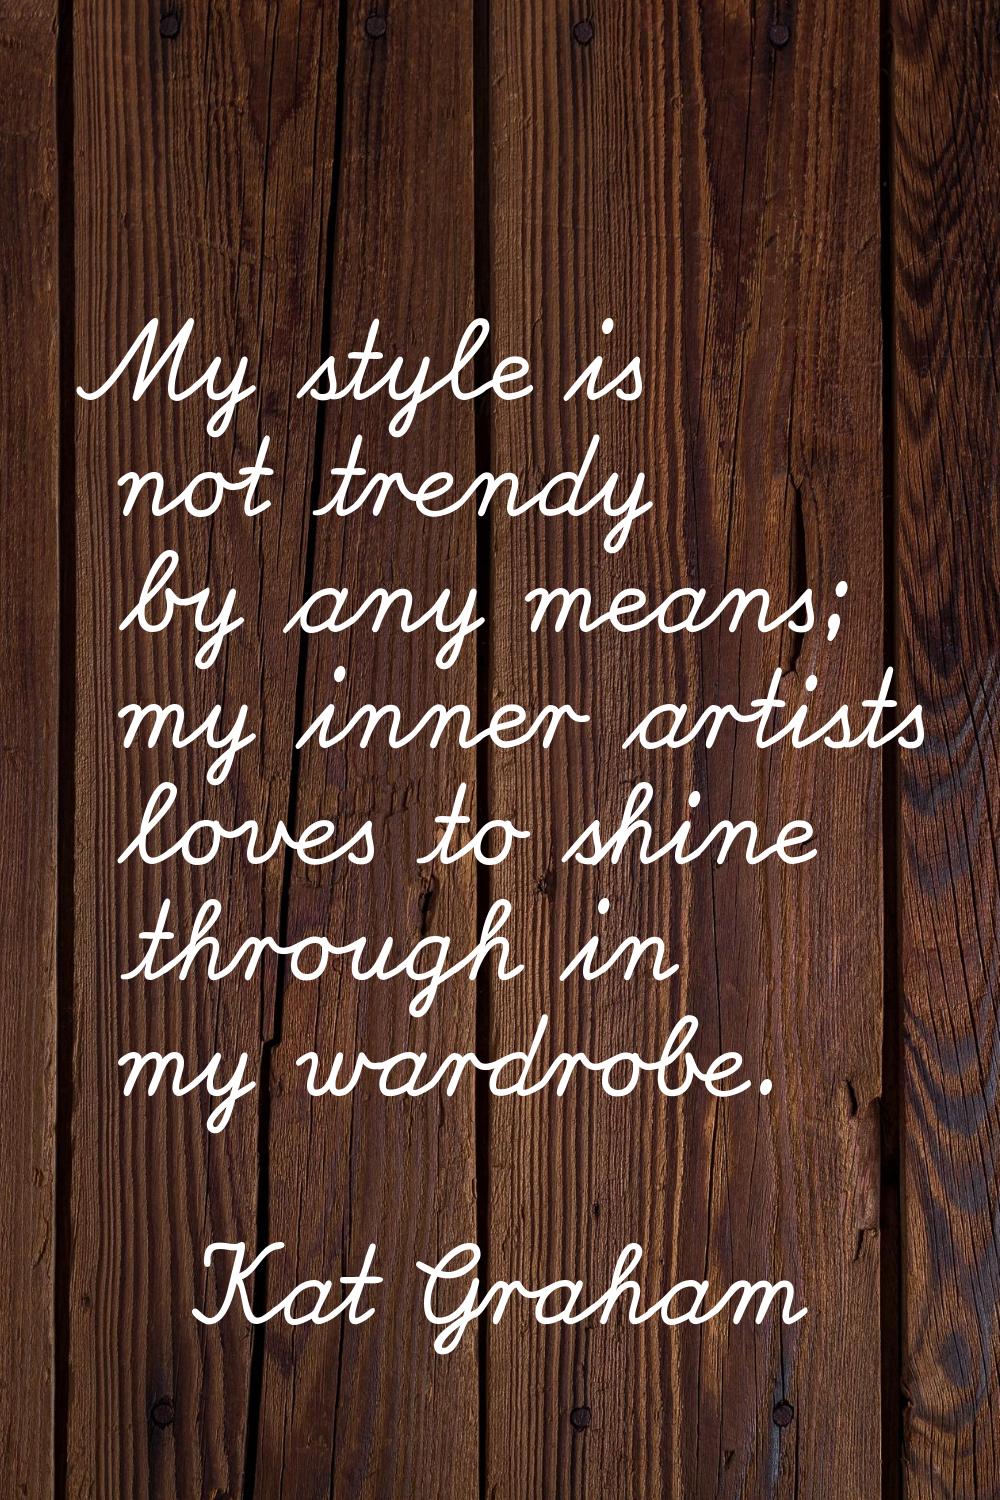 My style is not trendy by any means; my inner artists loves to shine through in my wardrobe.